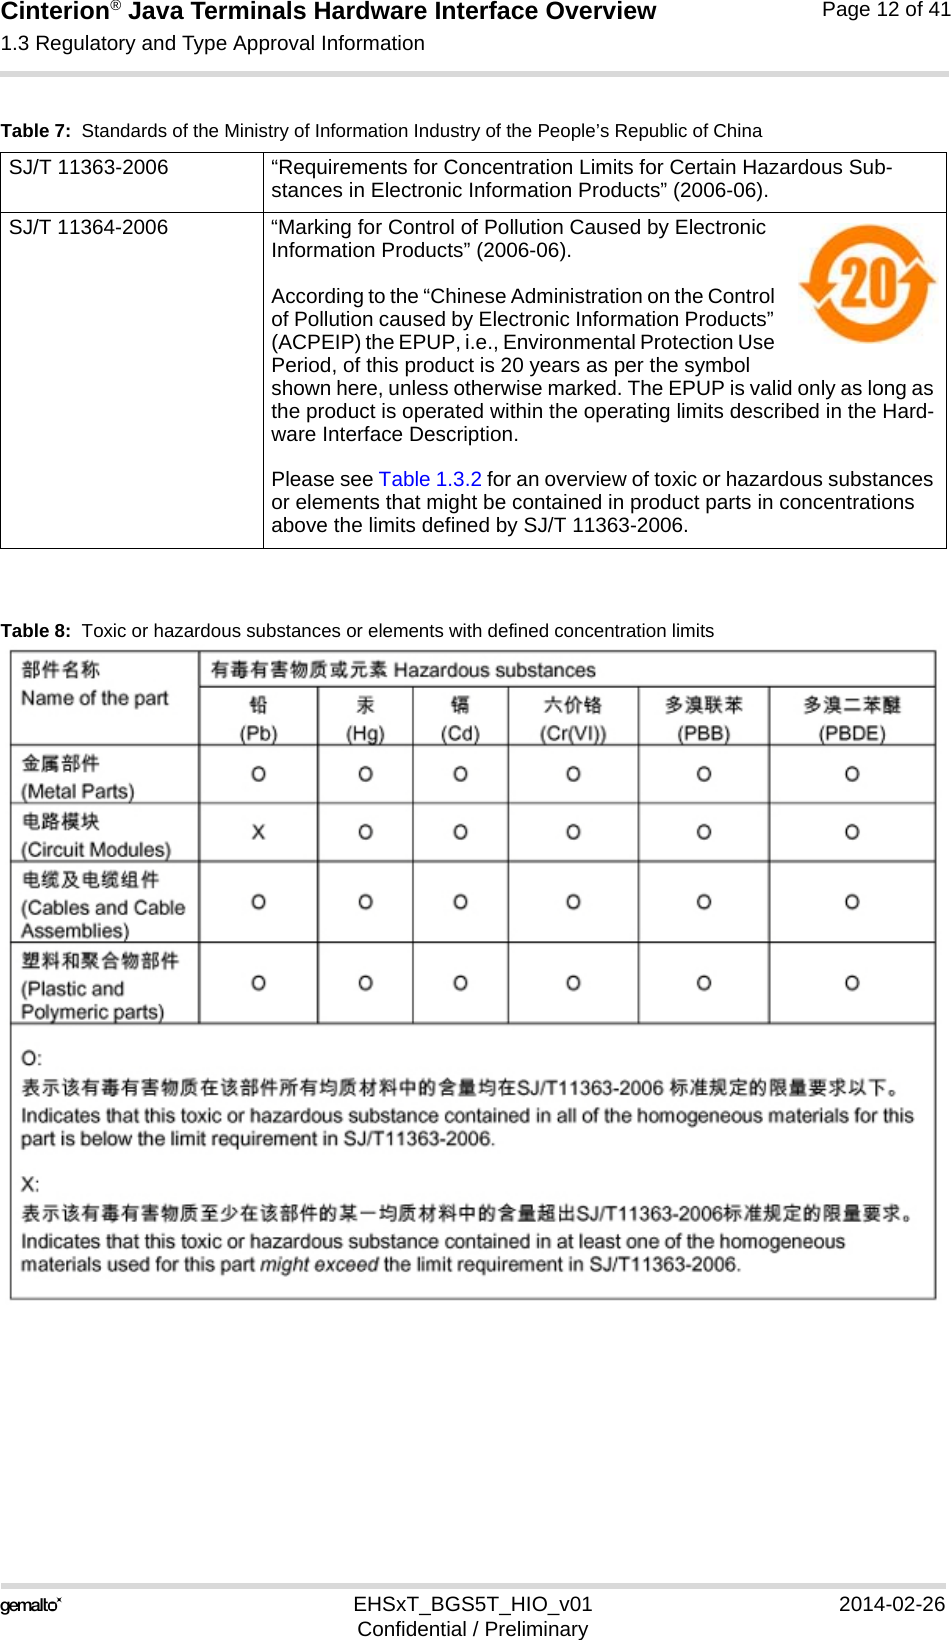 Cinterion® Java Terminals Hardware Interface Overview1.3 Regulatory and Type Approval Information15EHSxT_BGS5T_HIO_v01 2014-02-26Confidential / PreliminaryPage 12 of 41Table 8:  Toxic or hazardous substances or elements with defined concentration limitsTable 7:  Standards of the Ministry of Information Industry of the People’s Republic of ChinaSJ/T 11363-2006  “Requirements for Concentration Limits for Certain Hazardous Sub-stances in Electronic Information Products” (2006-06).SJ/T 11364-2006 “Marking for Control of Pollution Caused by Electronic Information Products” (2006-06).According to the “Chinese Administration on the Control of Pollution caused by Electronic Information Products” (ACPEIP) the EPUP, i.e., Environmental Protection Use Period, of this product is 20 years as per the symbol shown here, unless otherwise marked. The EPUP is valid only as long as the product is operated within the operating limits described in the Hard-ware Interface Description.Please see Table 1.3.2 for an overview of toxic or hazardous substances or elements that might be contained in product parts in concentrations above the limits defined by SJ/T 11363-2006. 